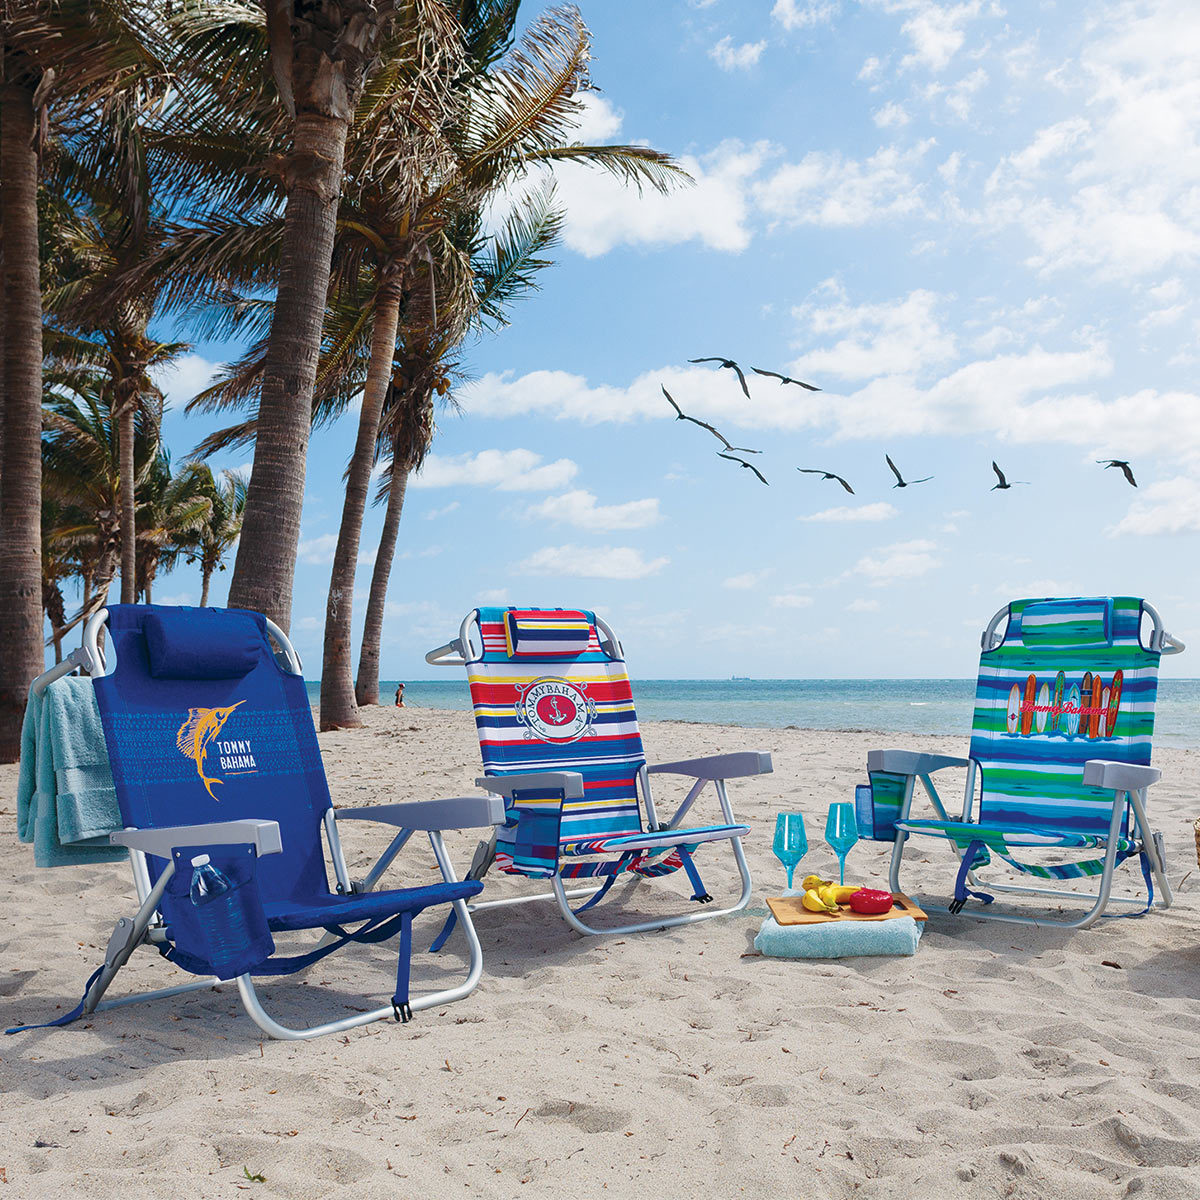 Costco Tommy Bahama Beach Chair 2020, Does Costco Have Beach Chairs 2020